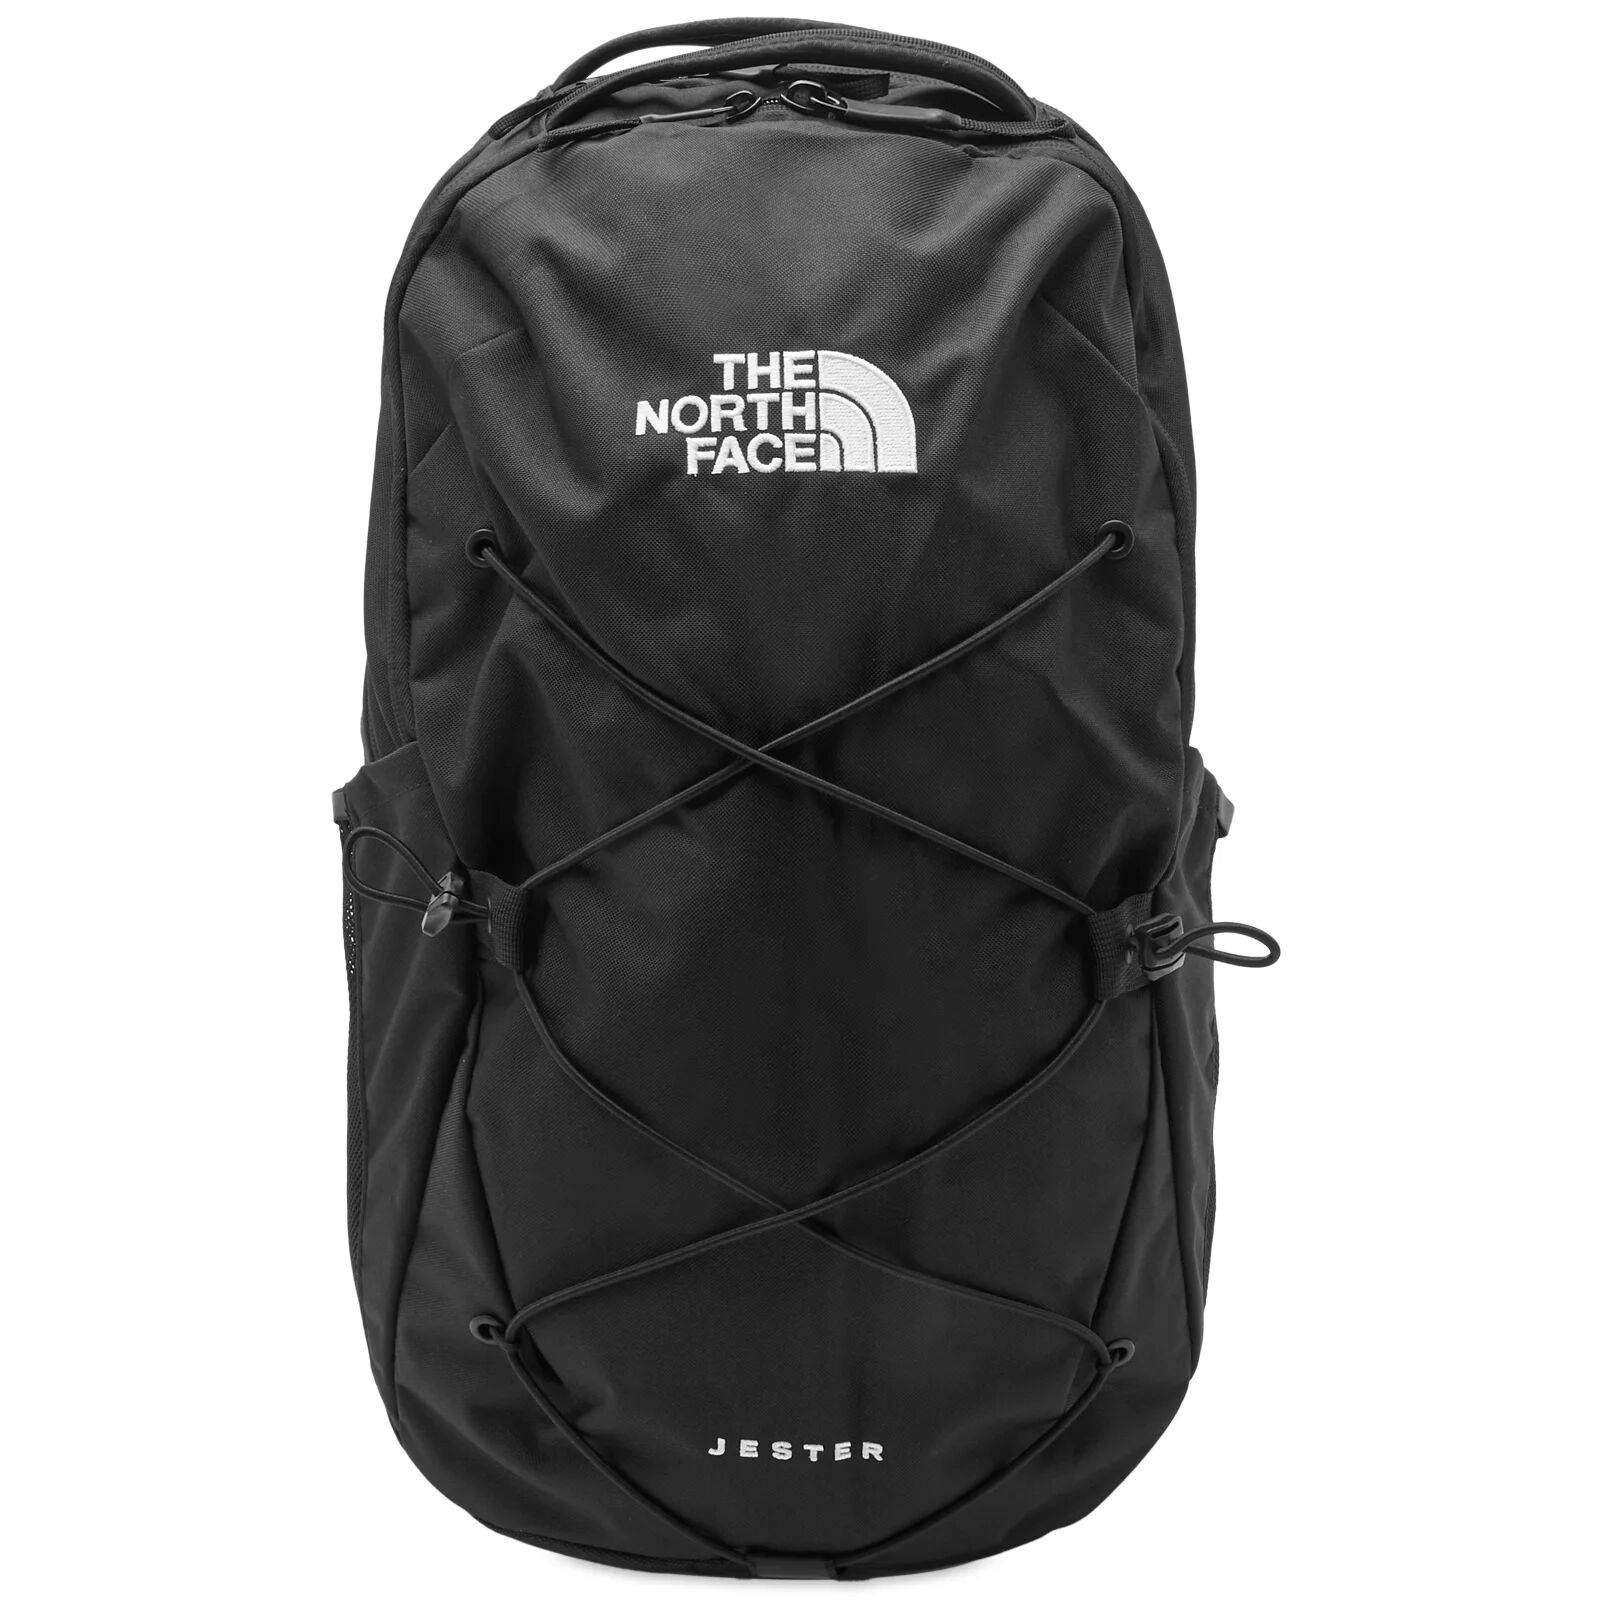 The North Face Jester Backpack in Black